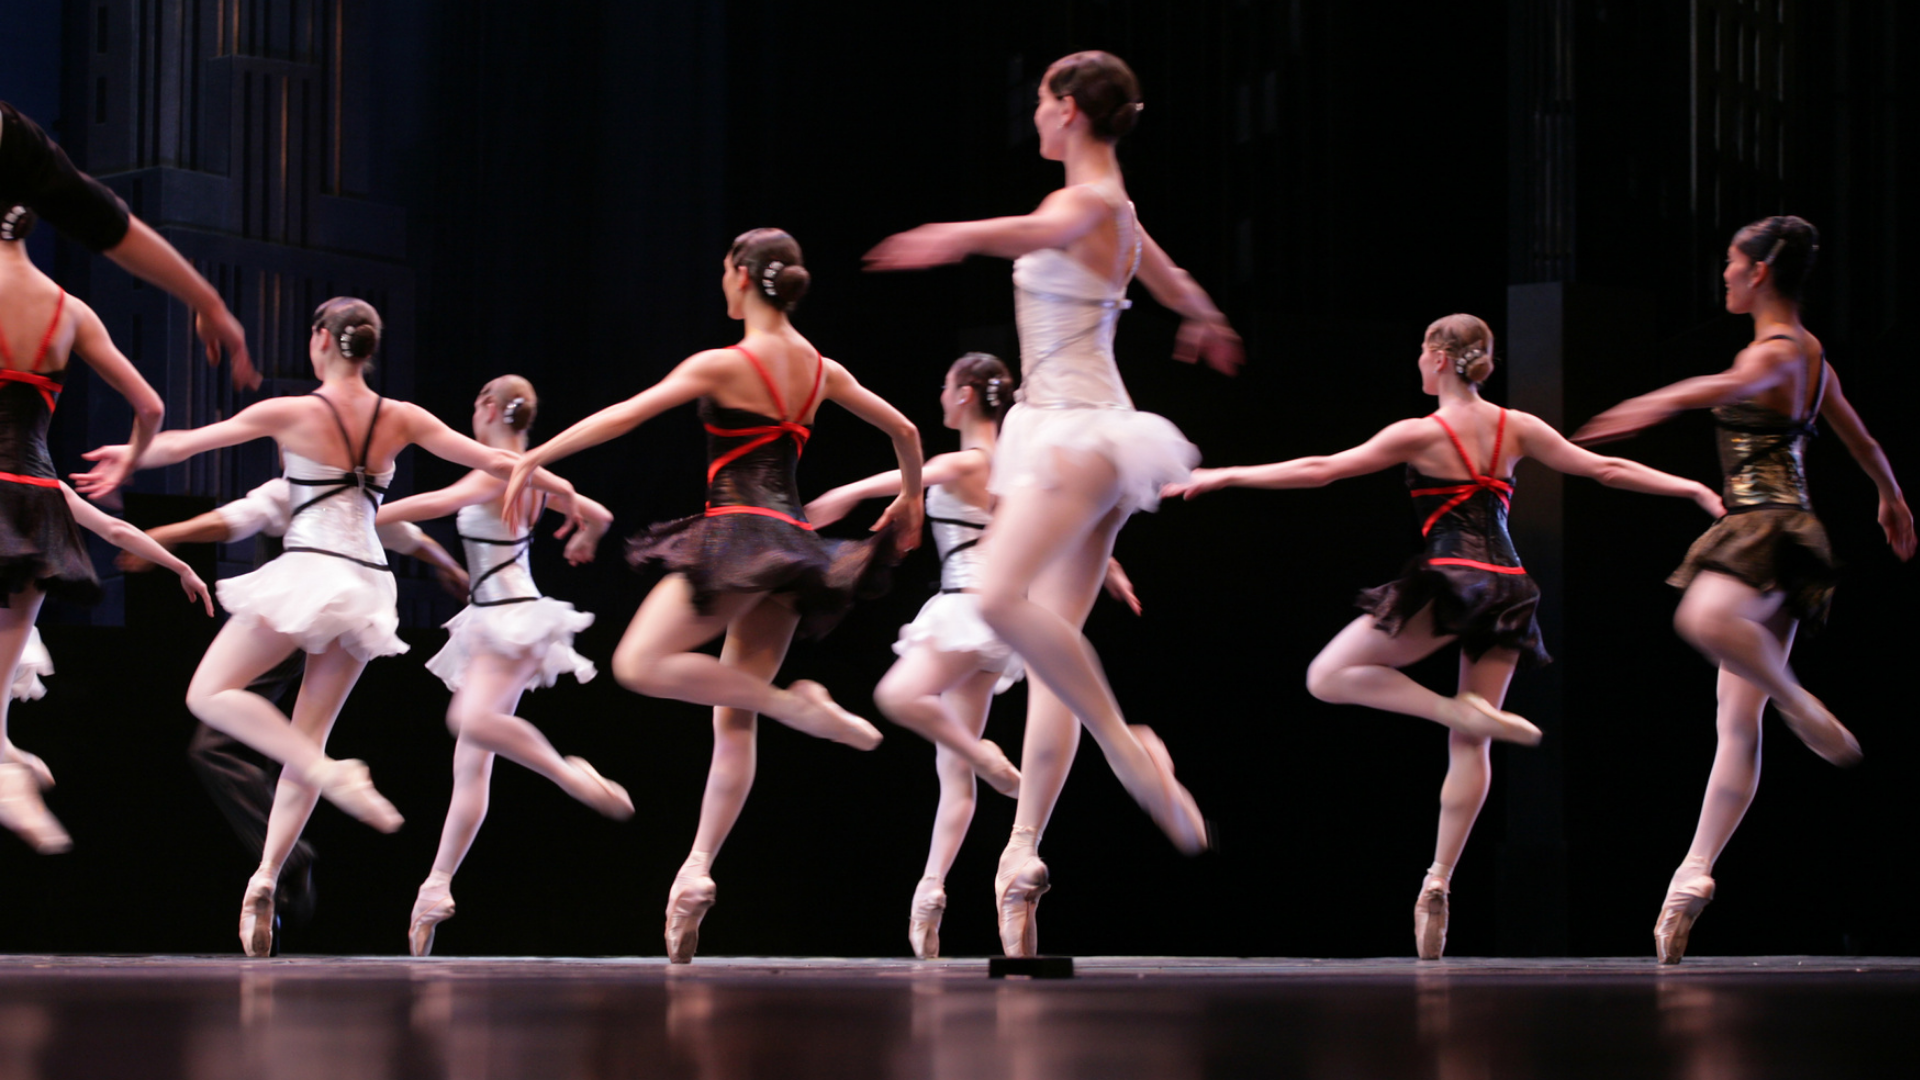 Erin Kelly’s sumptuous Watch Her Fall tackles Russian Ballet. Image credit: On The Go Tours / Flickr